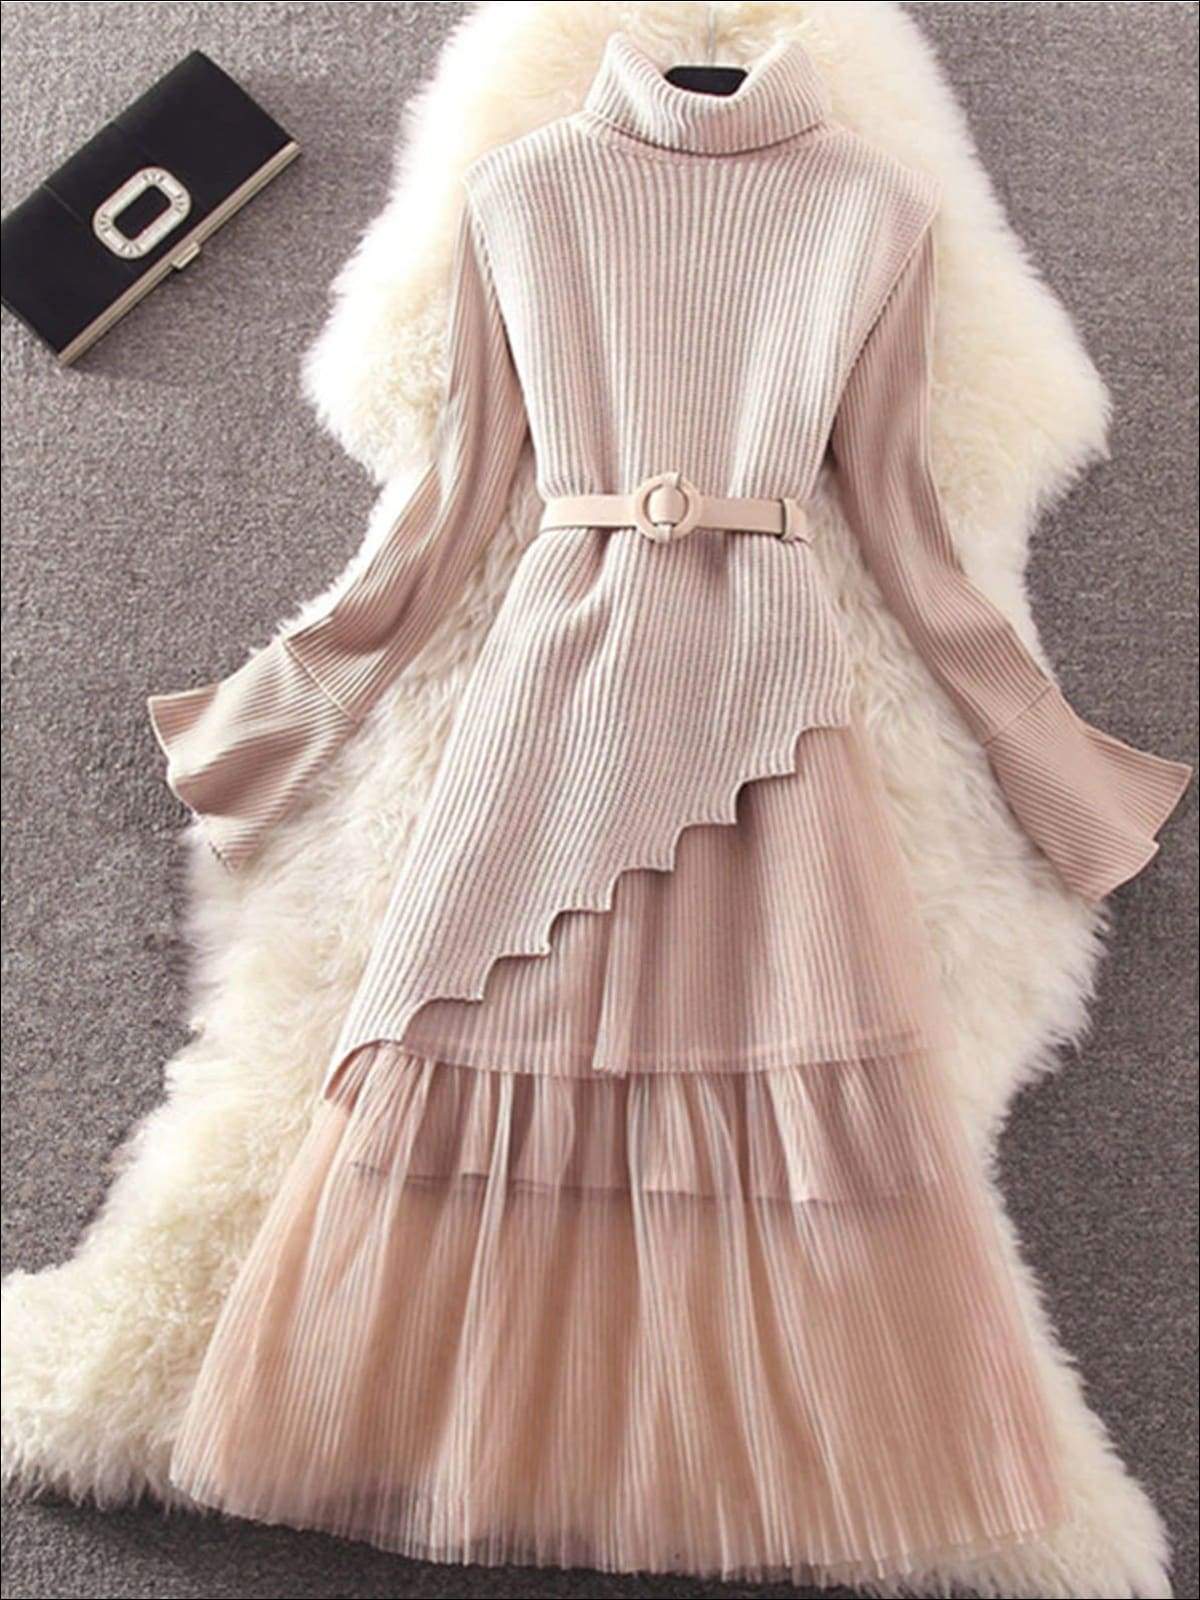 Womens Elegant Pleated Mesh Belted Sweater Dress - Pink / One Size - Womens Fall Dresses